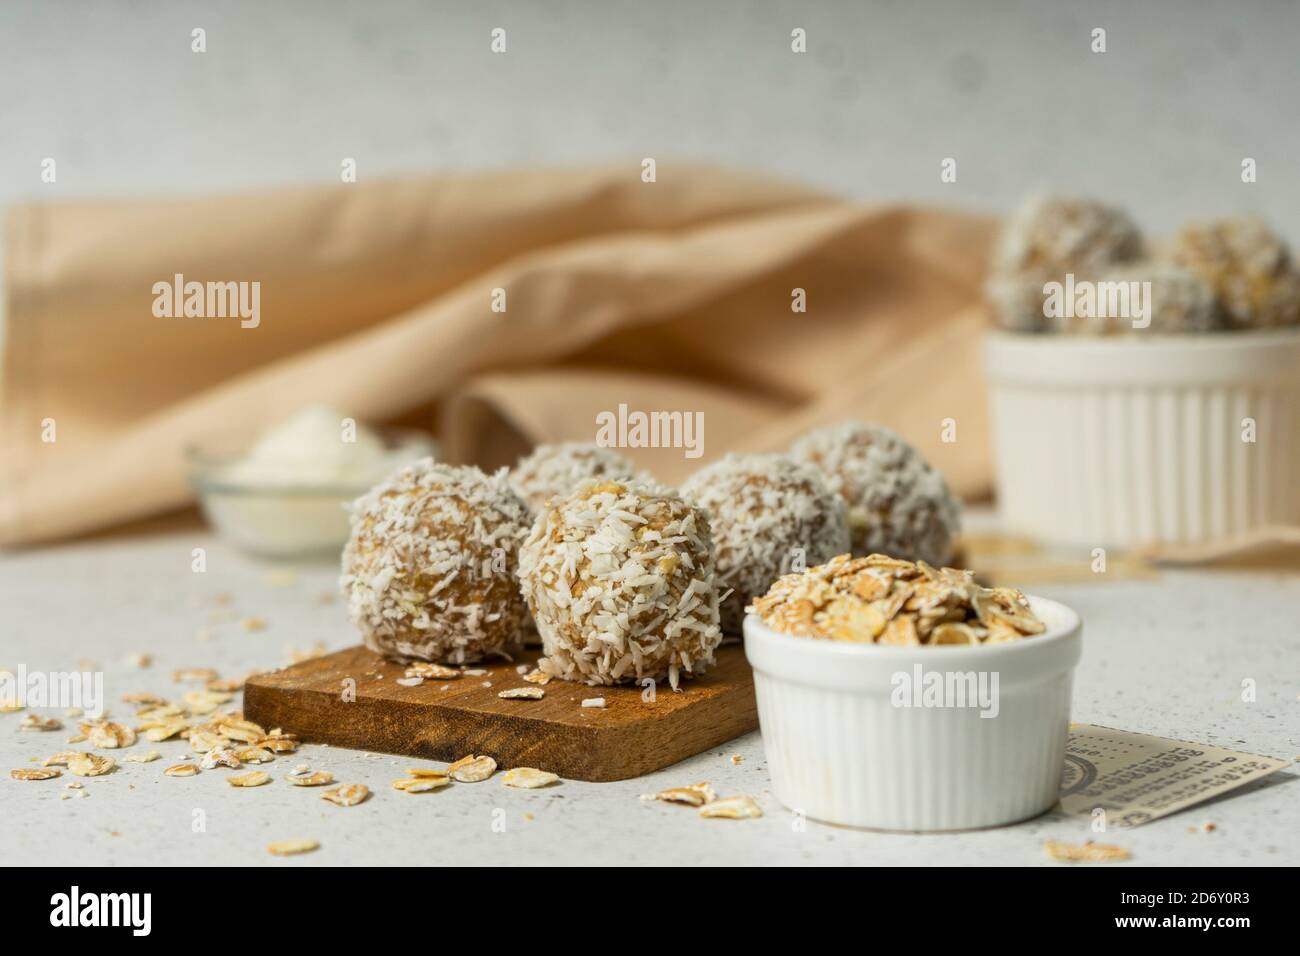 energy balls, whole oat flakes and coconut powder, low-calorie sweets, on a light background Stock Photo